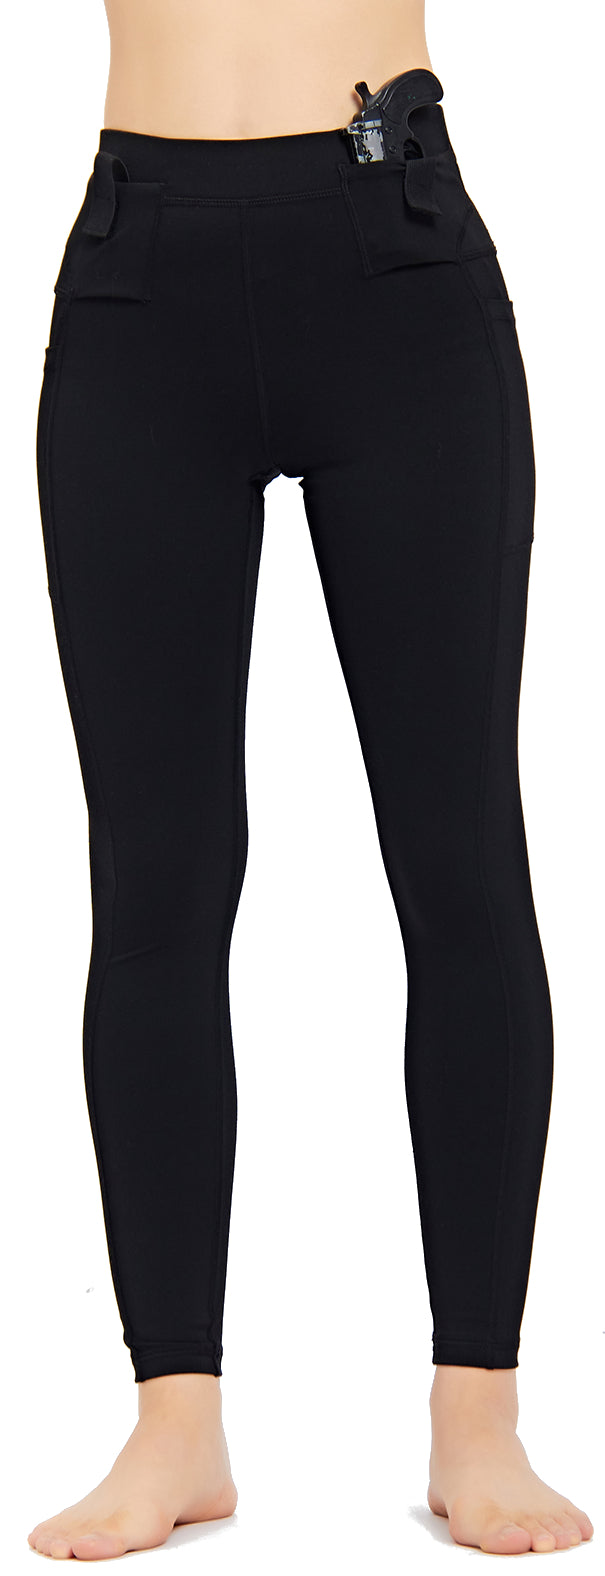 Concealed Carry Leggings With Pockets - Black